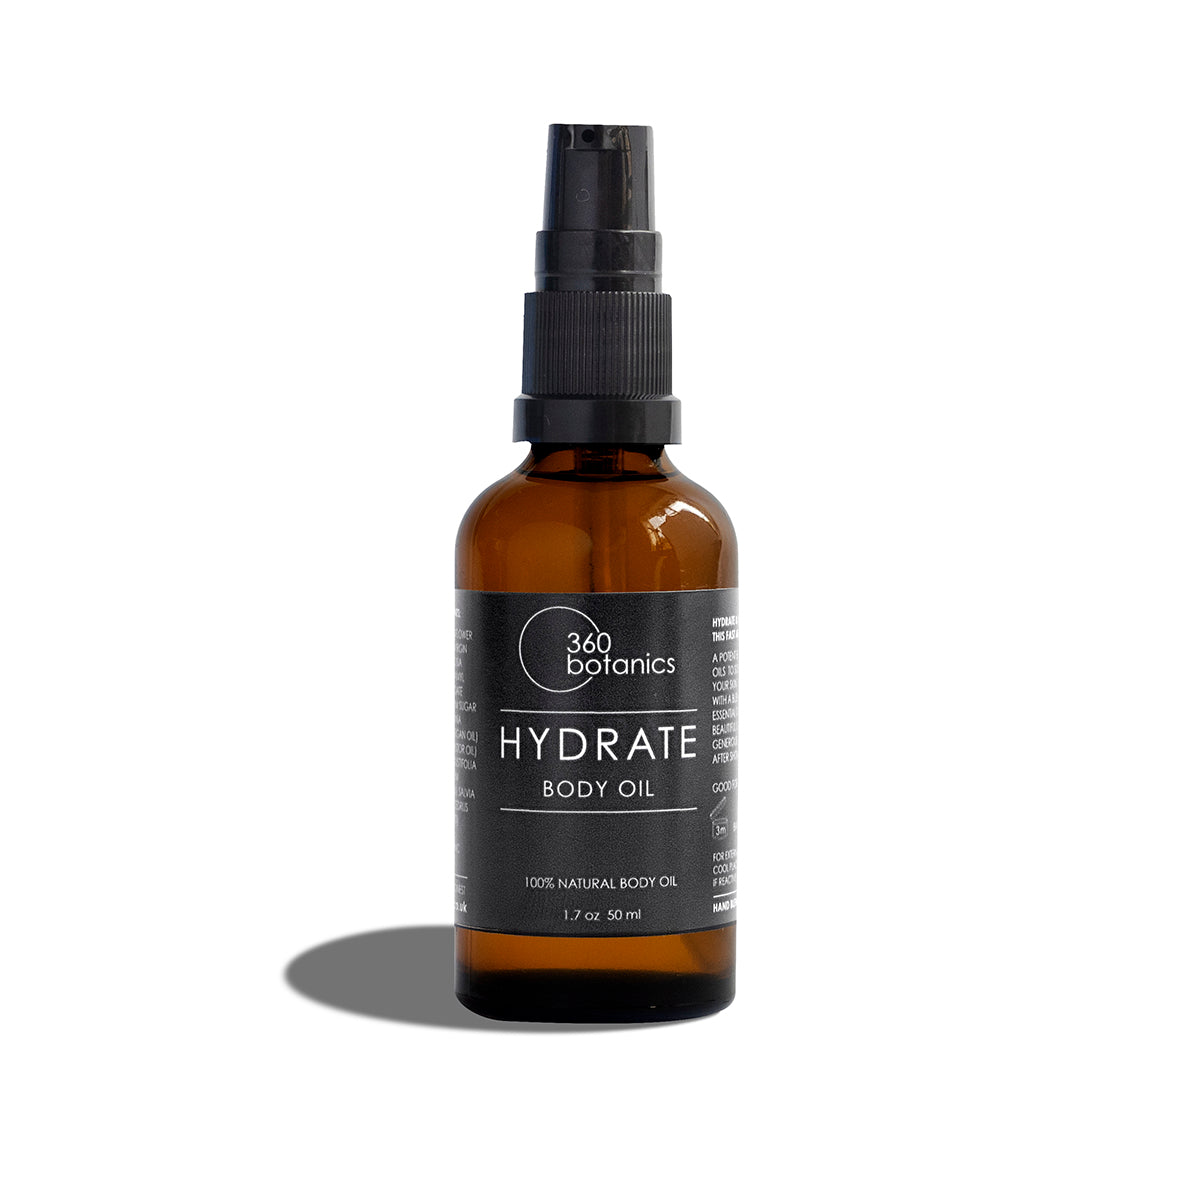 A 50 ml amber glass bottle of 360 Botanics Hydrate Body Oil with a black spray nozzle, set against a white background. The label clearly states '100% NATURAL BODY OIL,' appealing to consumers looking for pure, hydrating skincare solutions